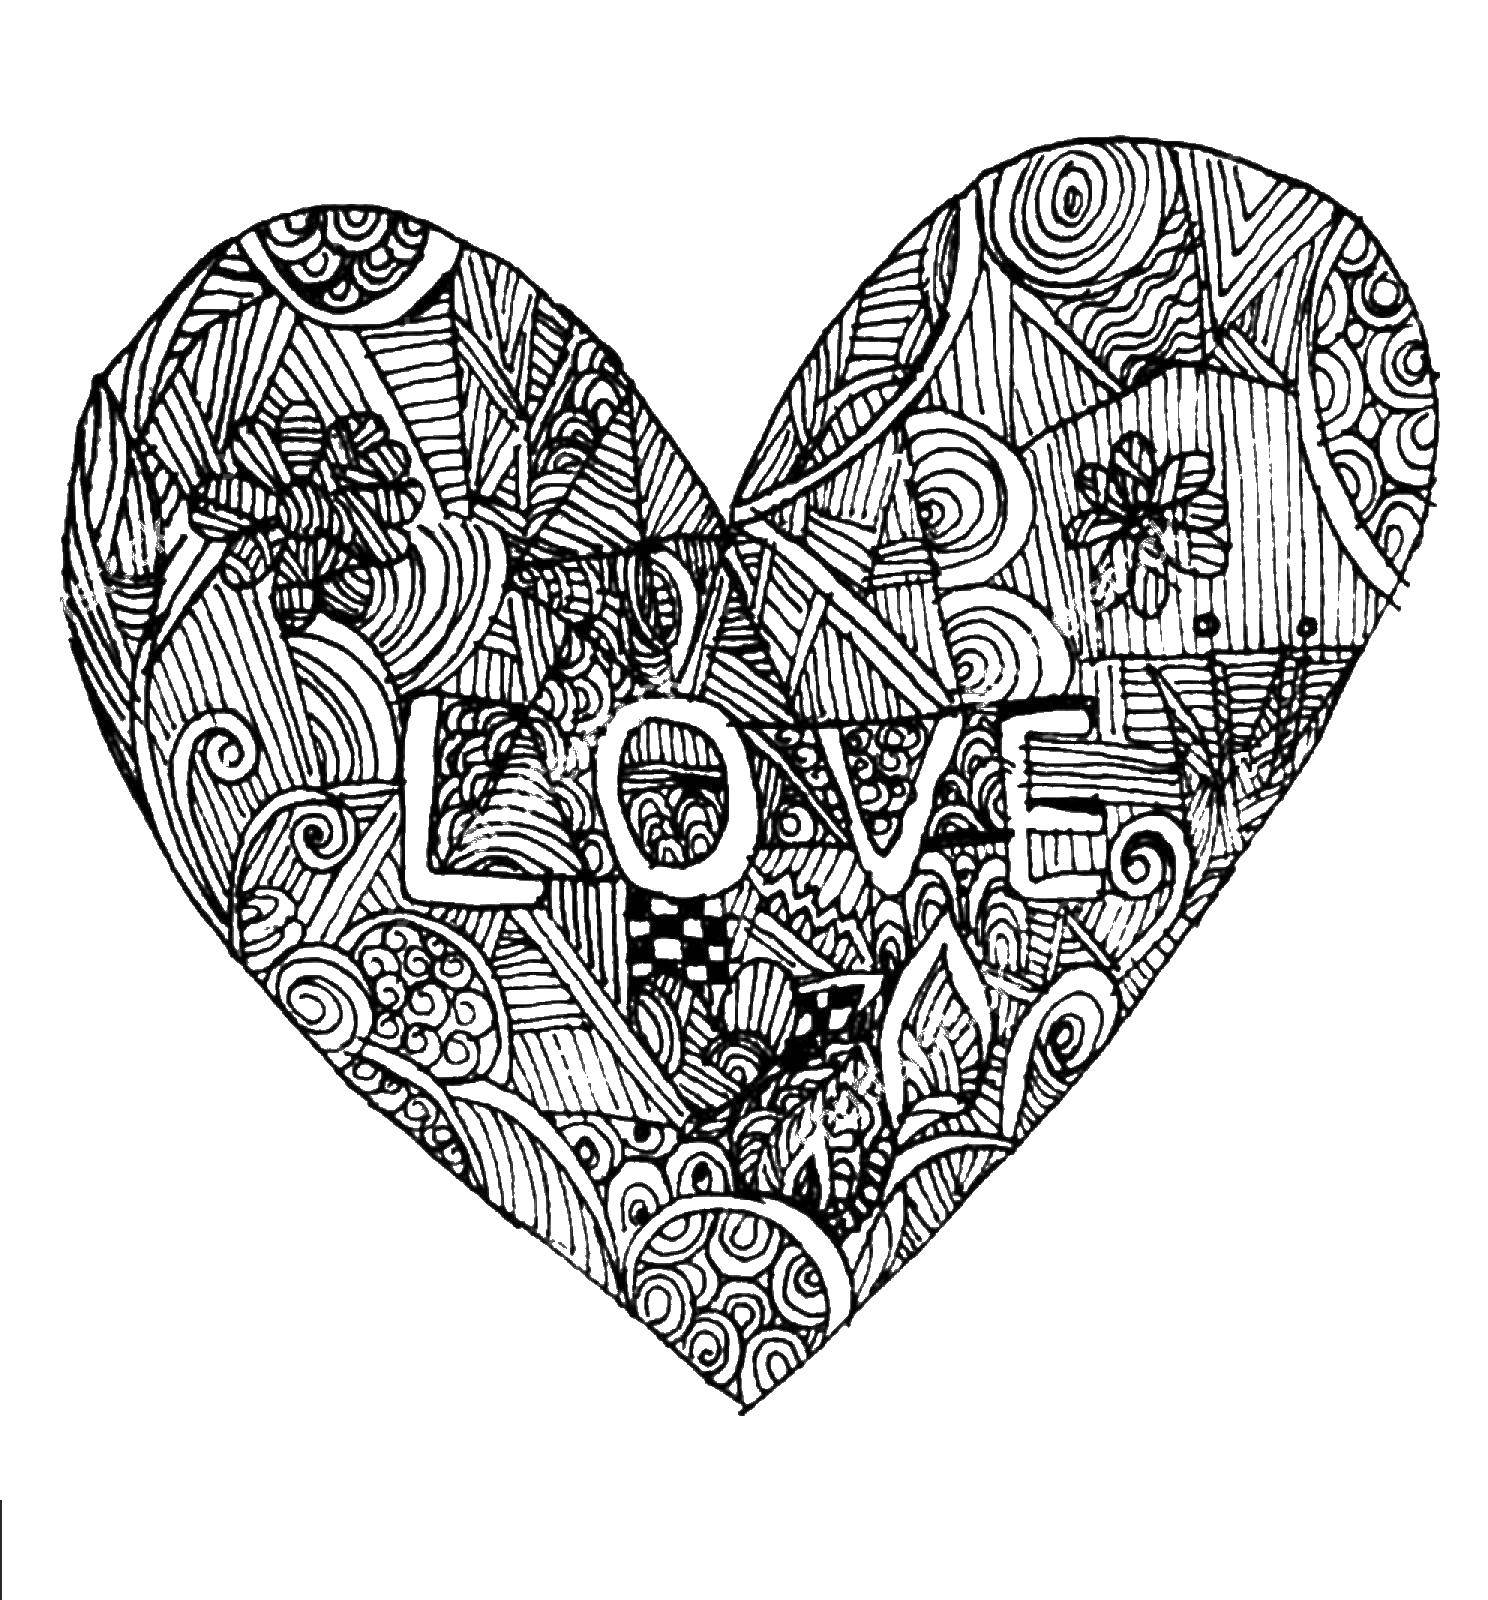 Coloring Patterned heart. Category coloring. Tags:  Labels, patterns.